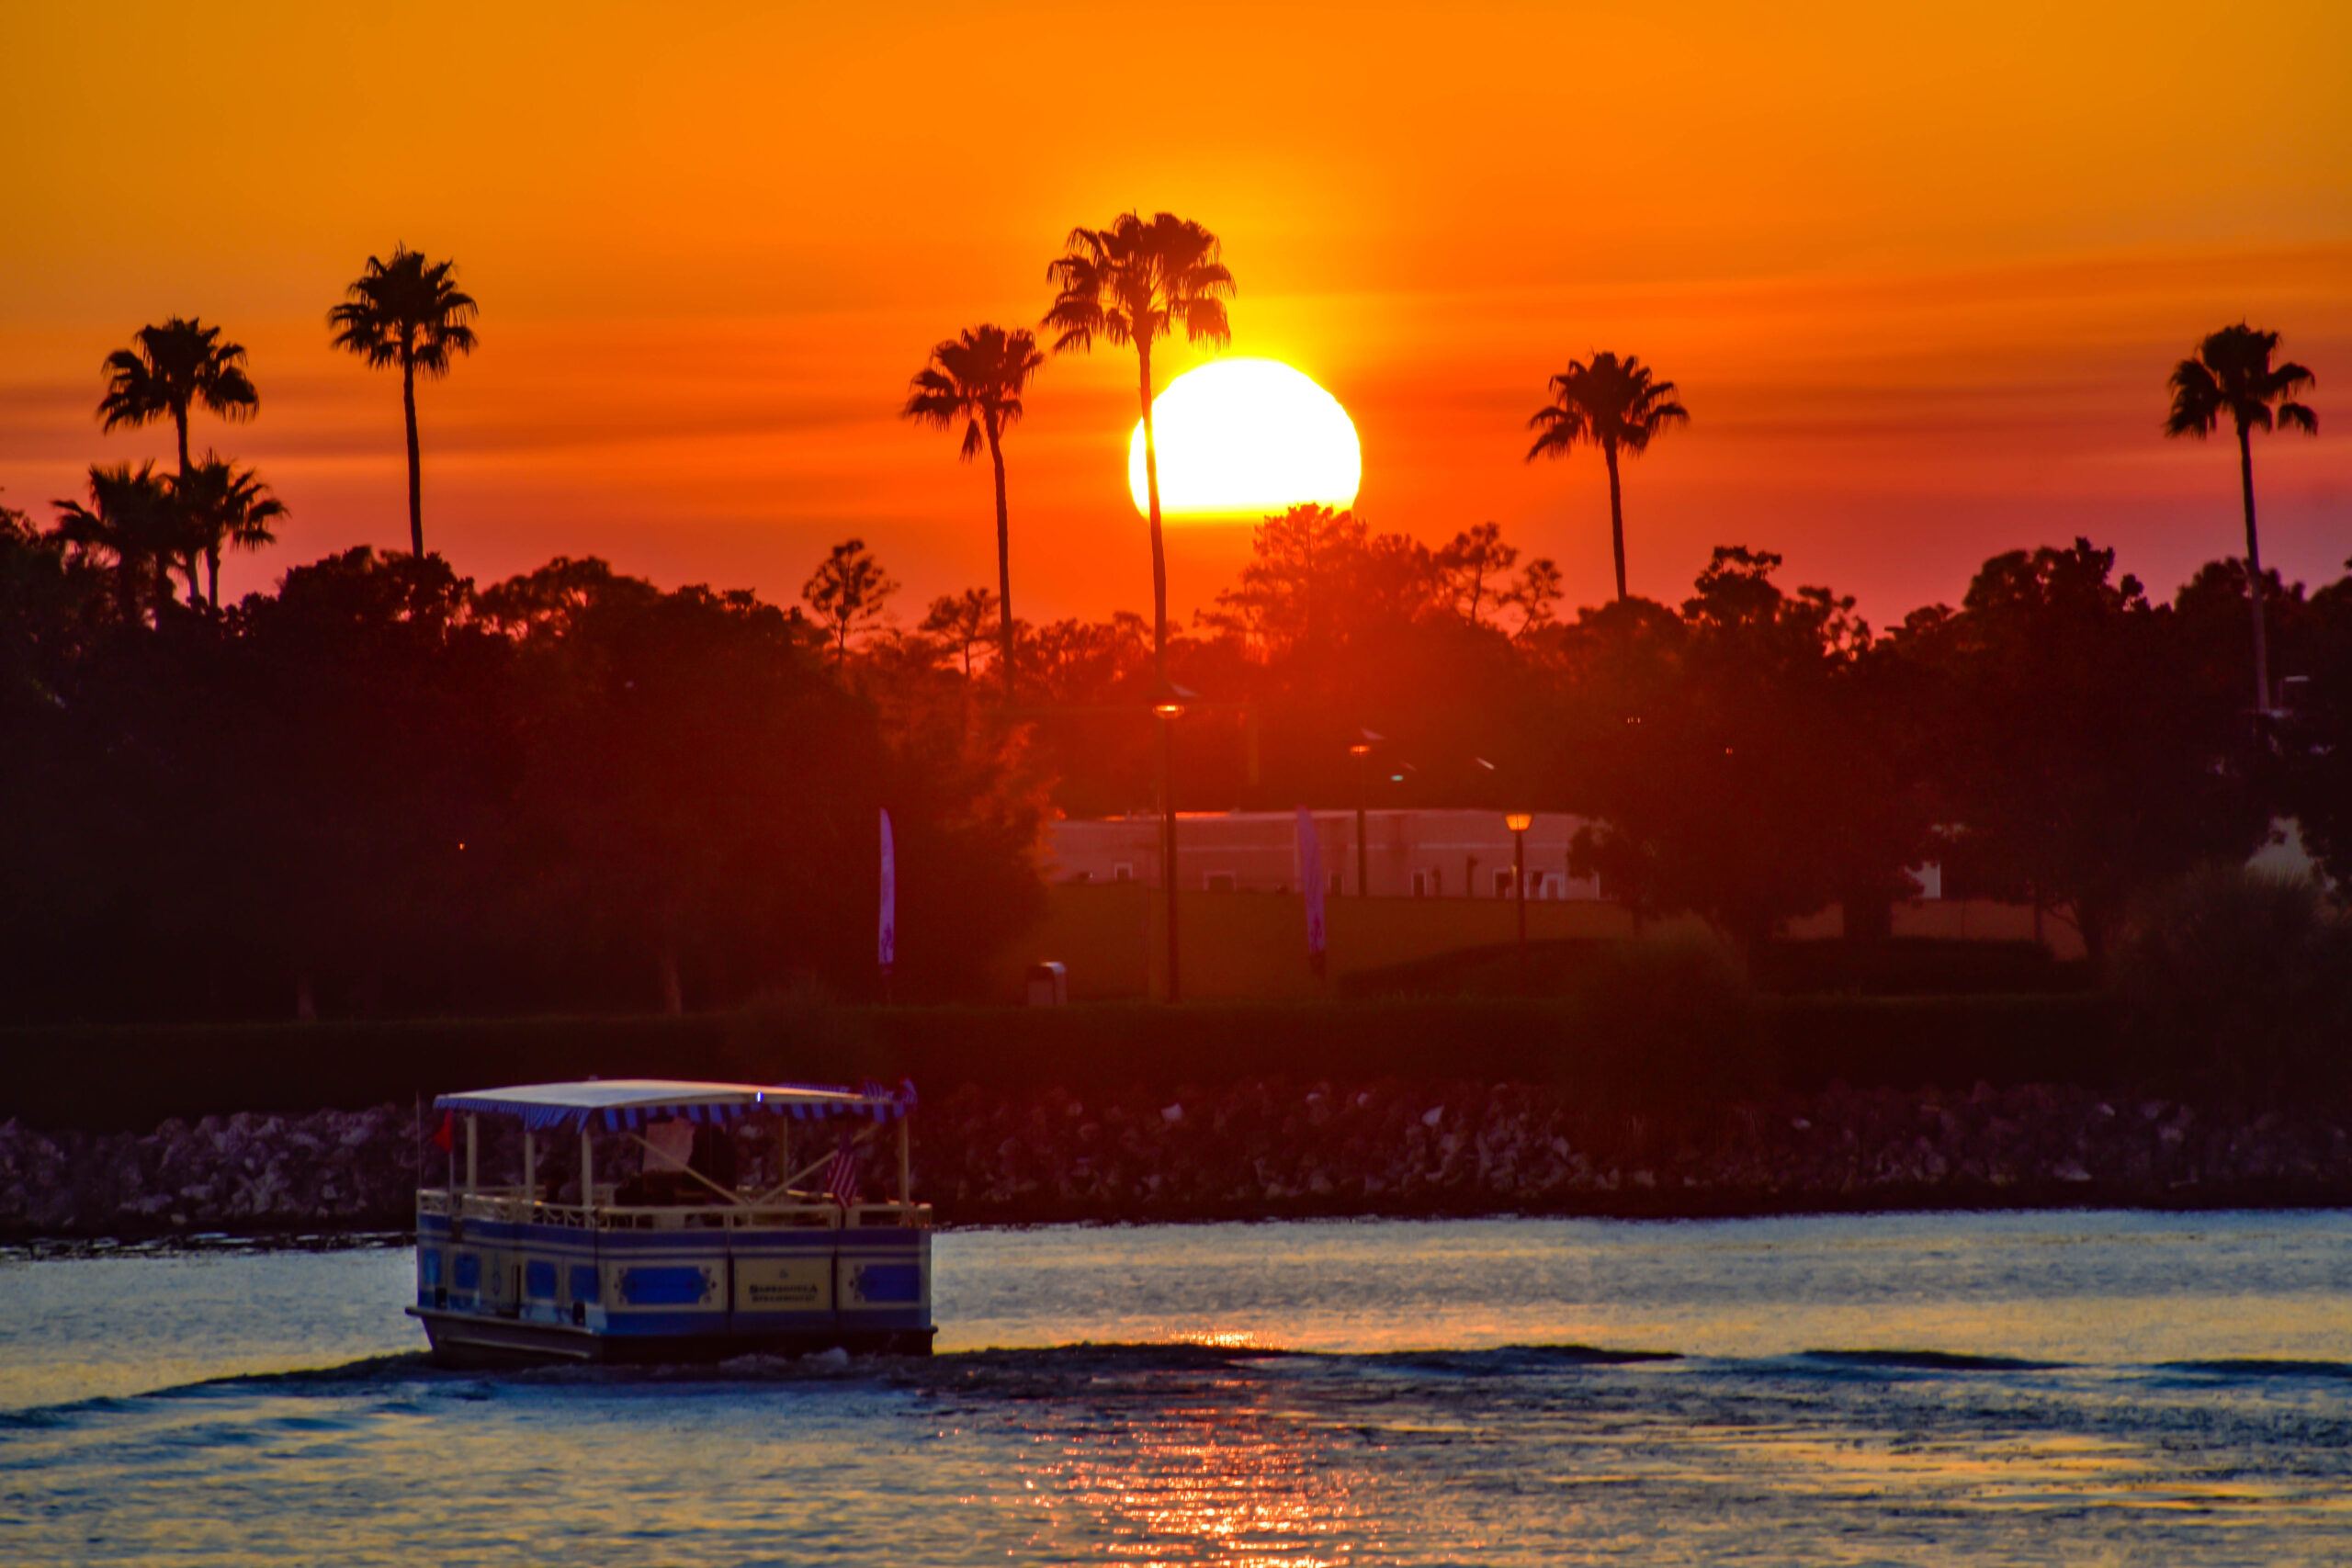 View of water ferry at sunset in Disney World.